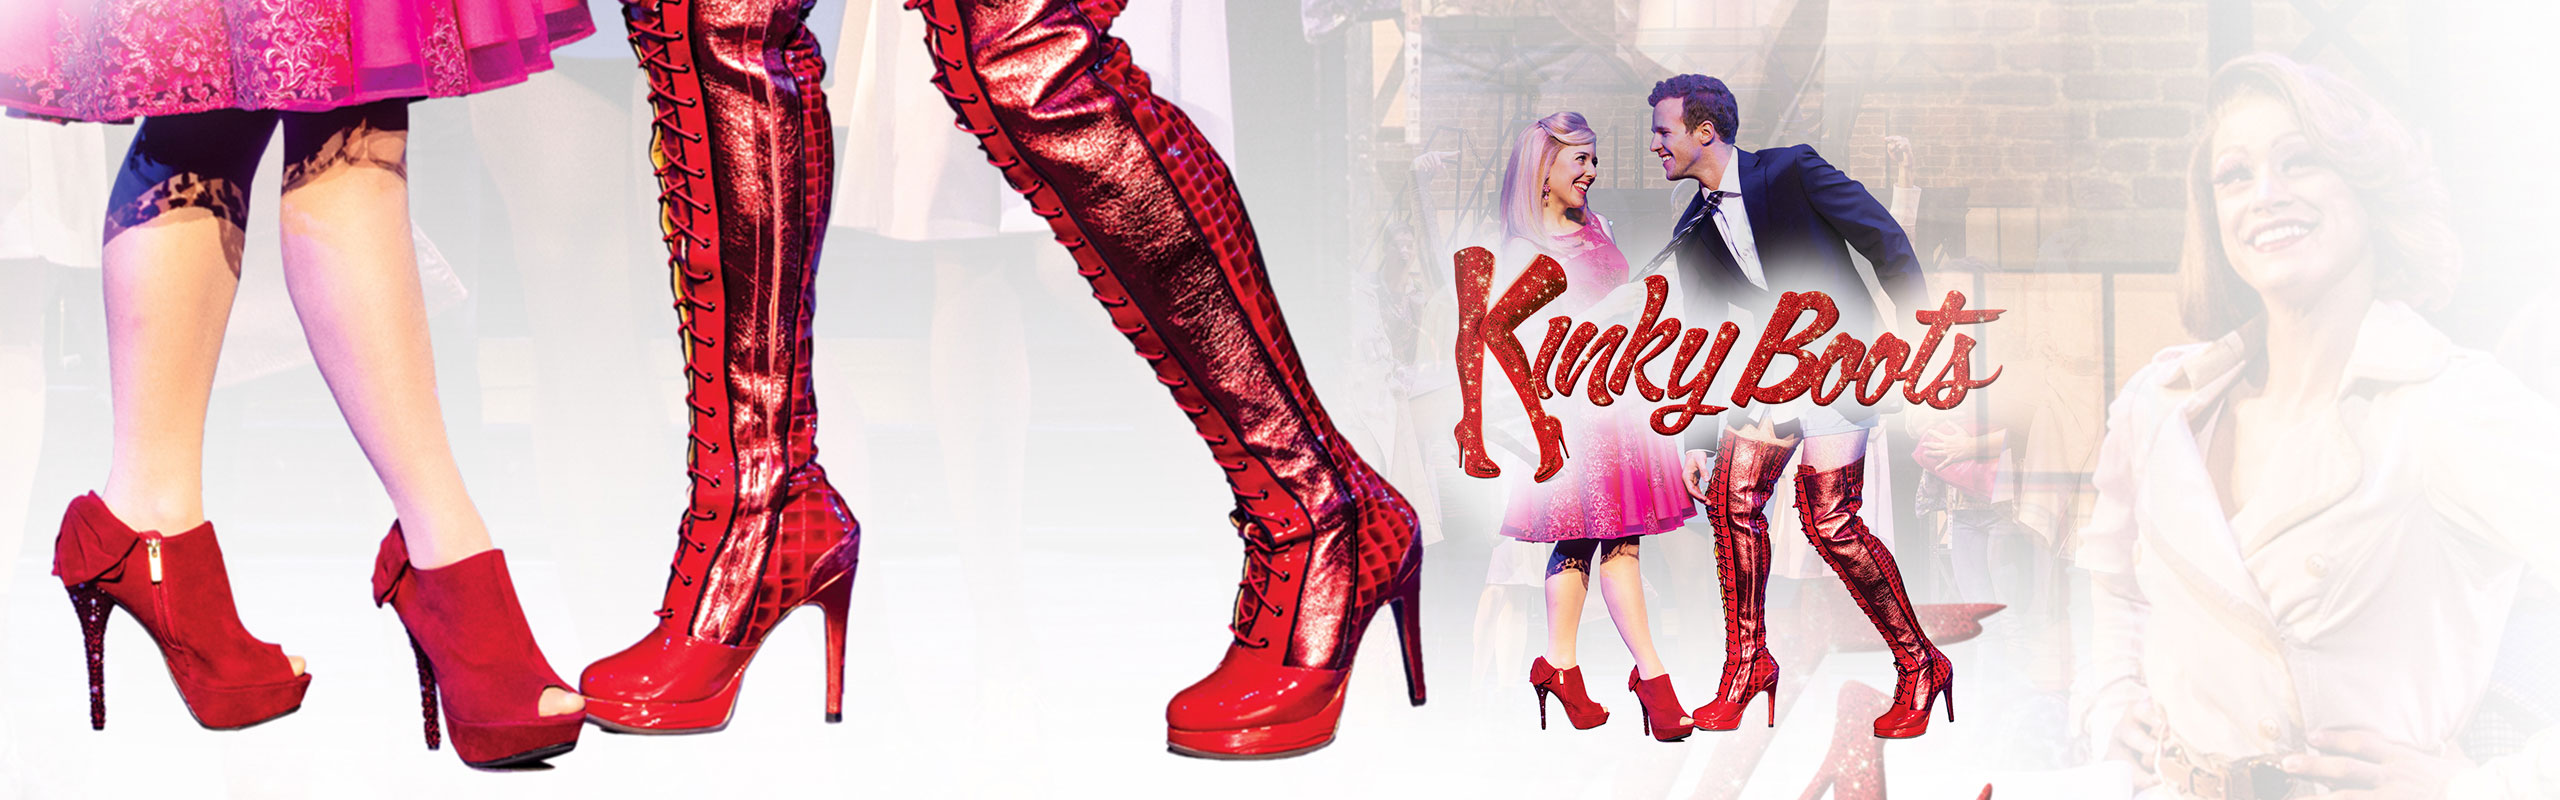 Pictuer of Kinky Boots Musical - Performing Arts and Leadership